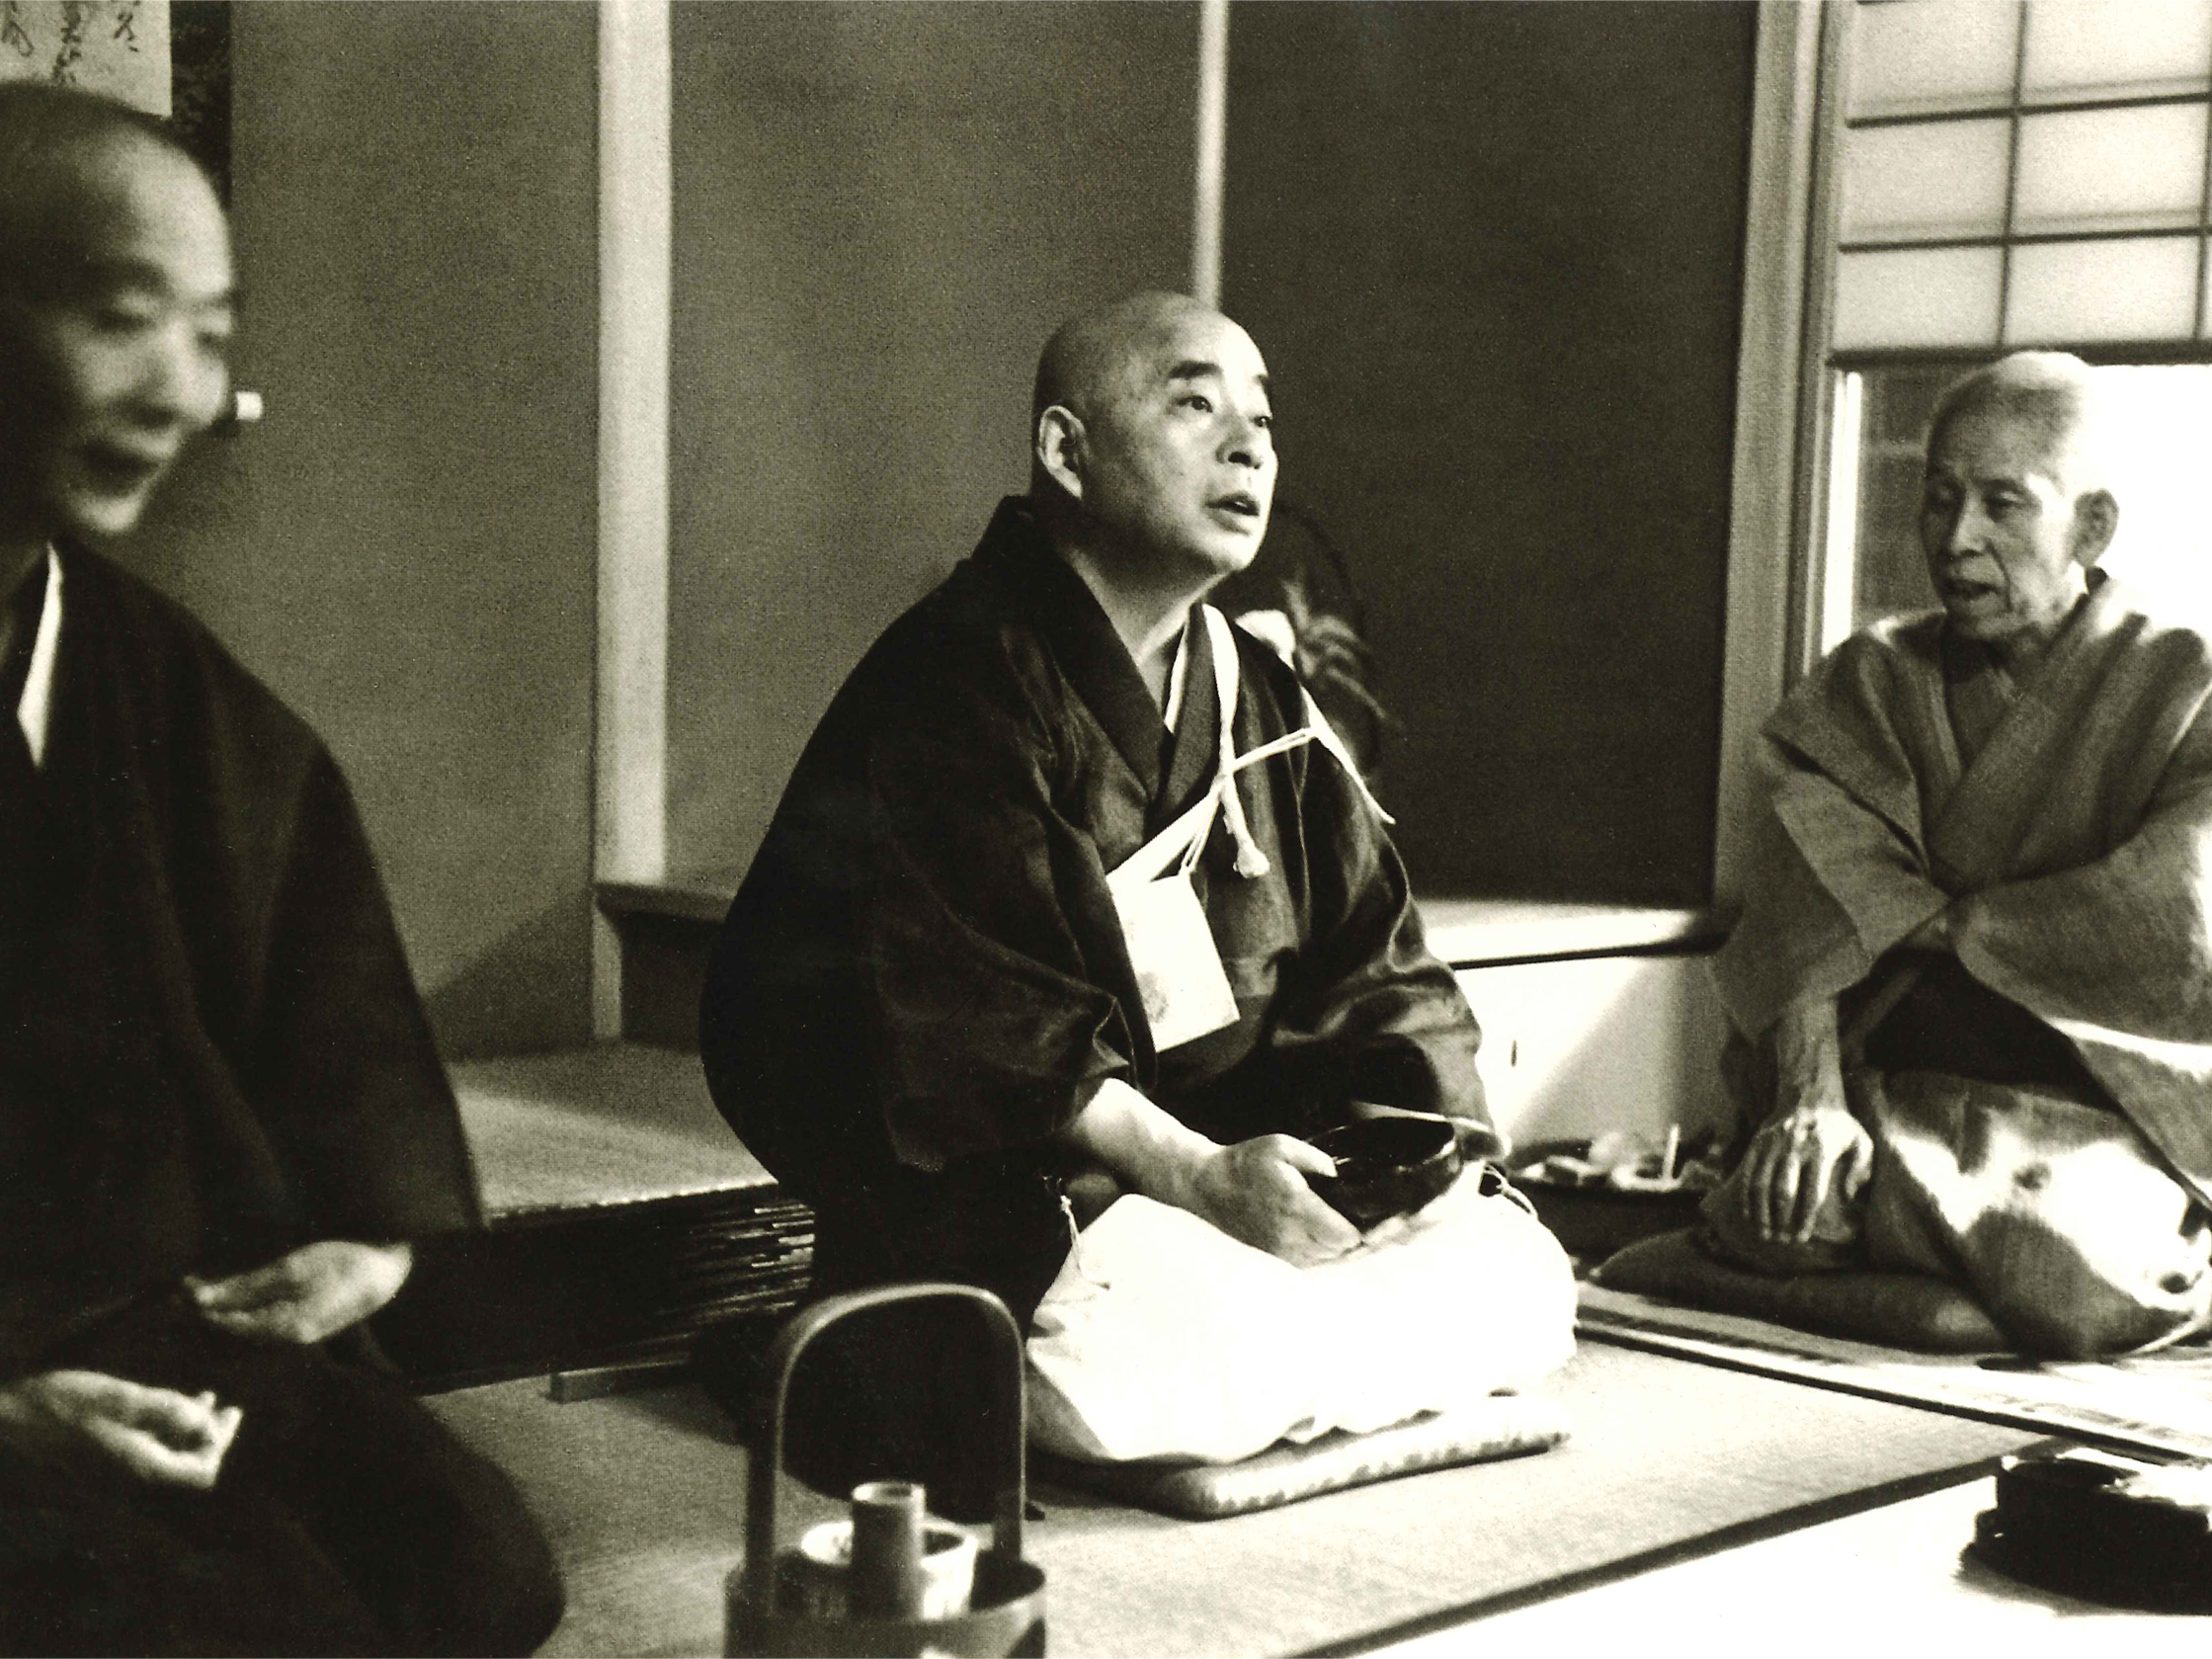 Okada admired good artists and intellectuals and valued interaction with them. Center is Gyoin Hashimoto (Yakushiji Temple) and on the left is Soshu Sen (Mushakoji-senke tea school’s 9th Iemoto tea master)  (August 24, 1952)